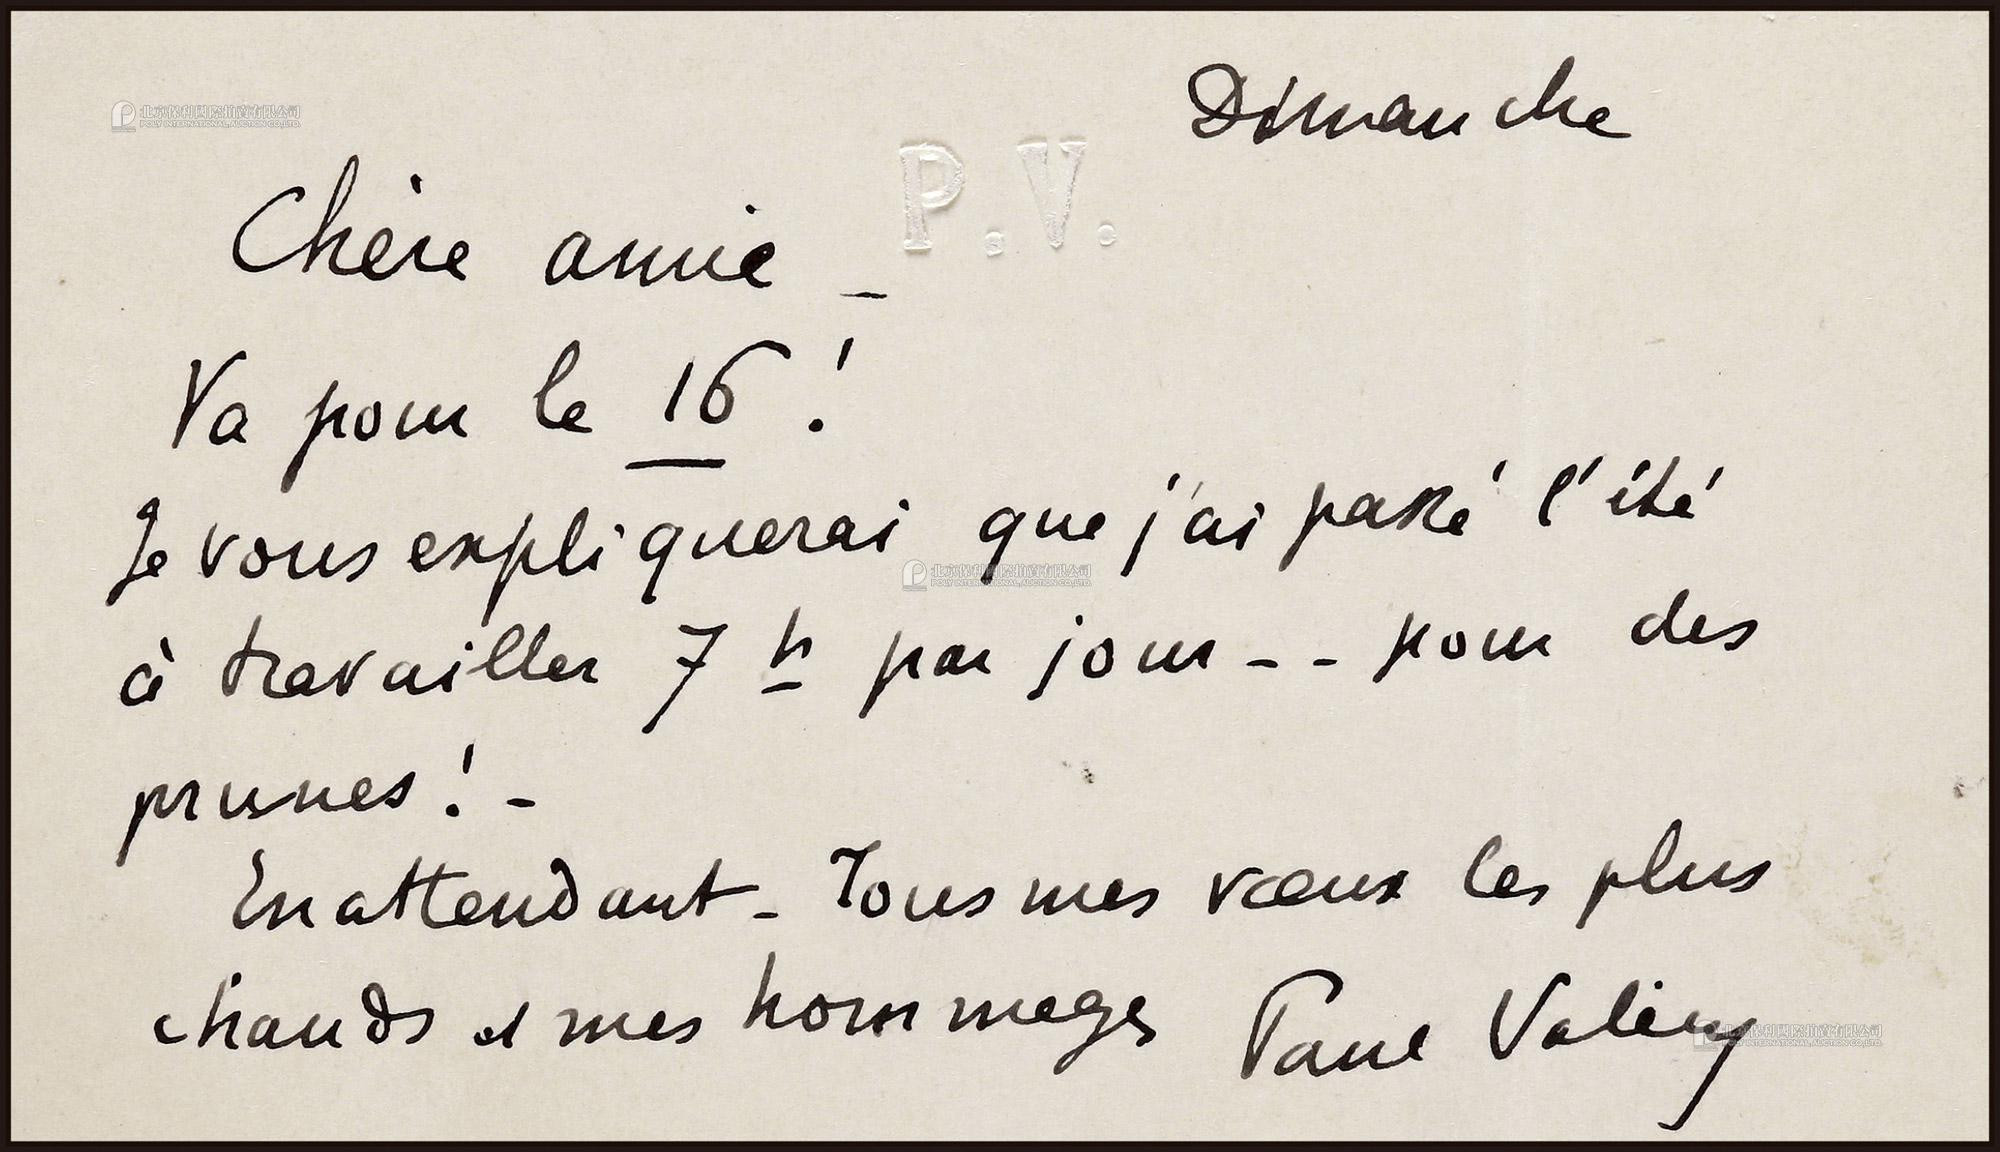 The letter from Paul Valery, “the greatest French poet of the 20th century”, to a friend, with a certificate